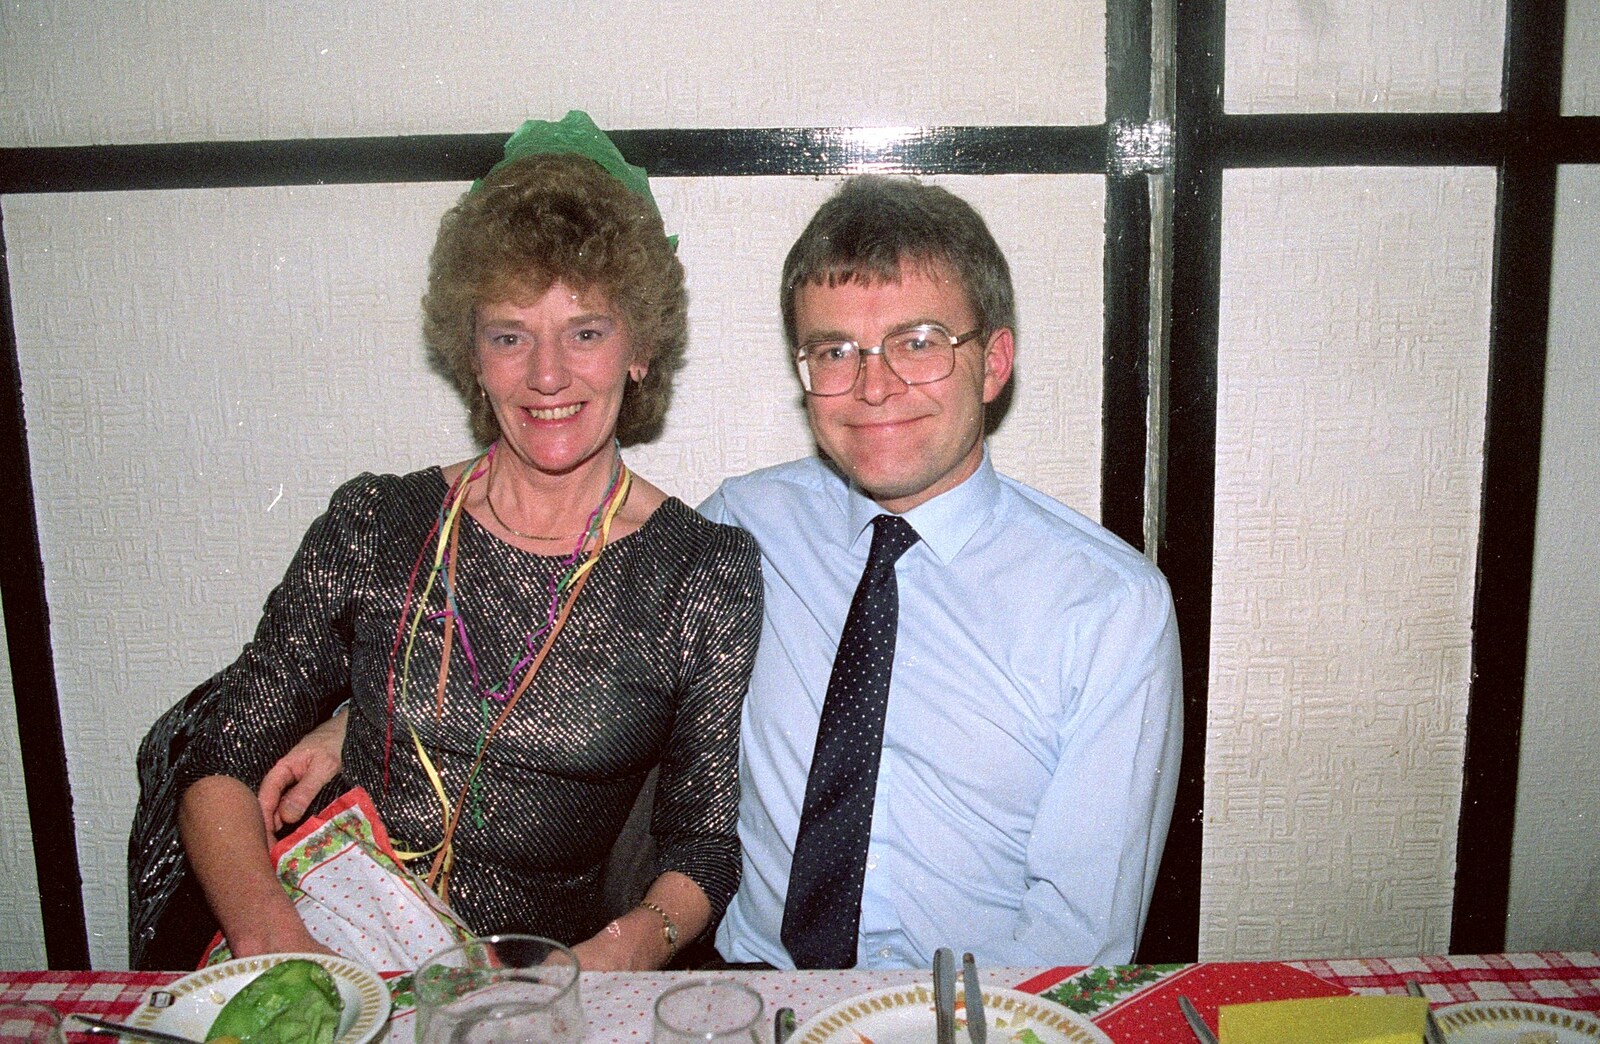 Hamish's parents from Hamish's 21st and Christmas, New Milton and Bransgore - 25th December 1987